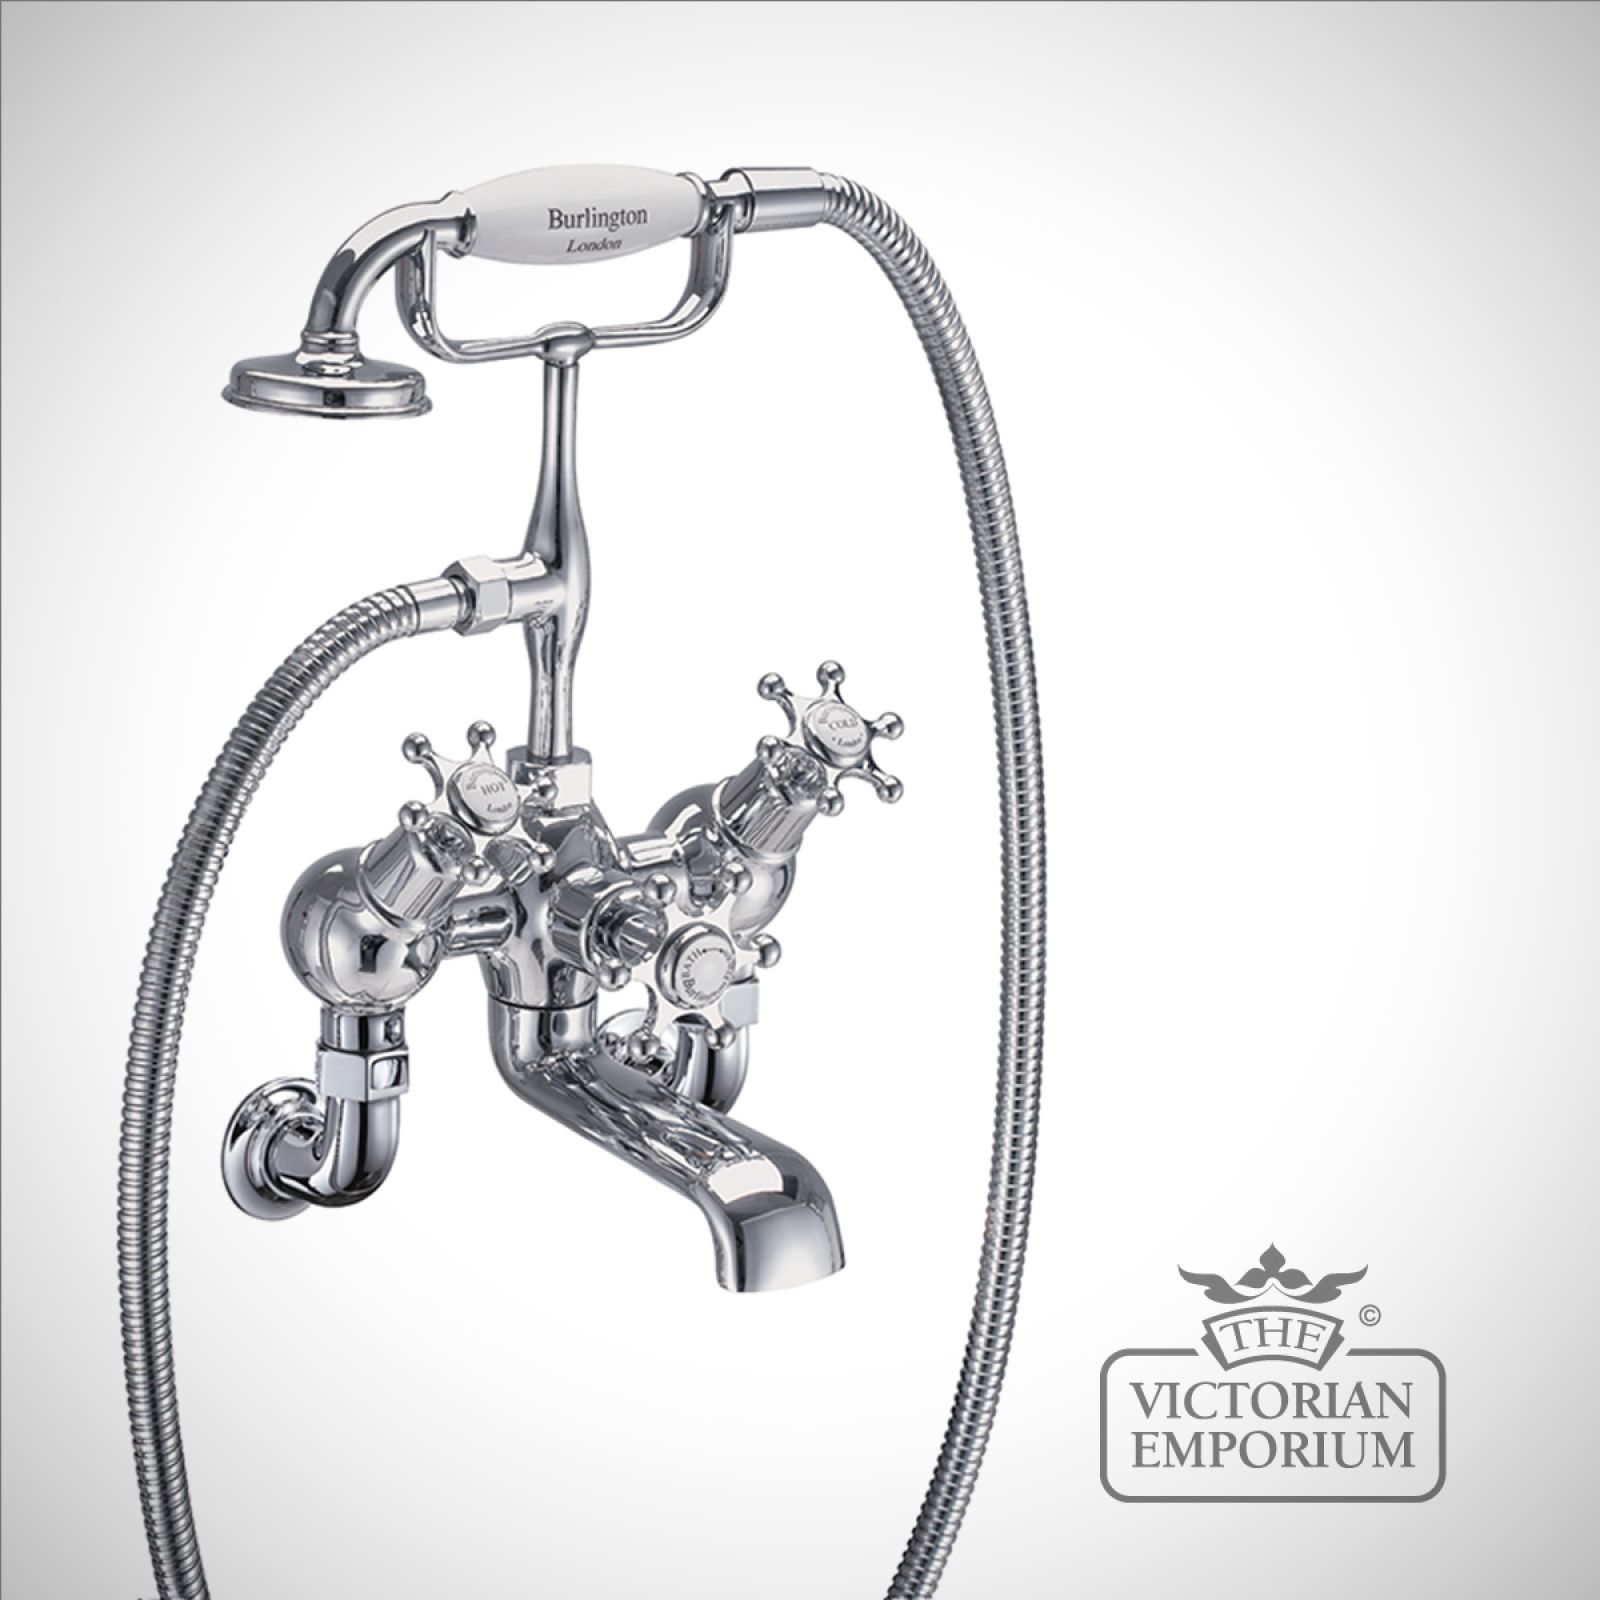 Liverpool Angled Wall mounted bath and shower mixer